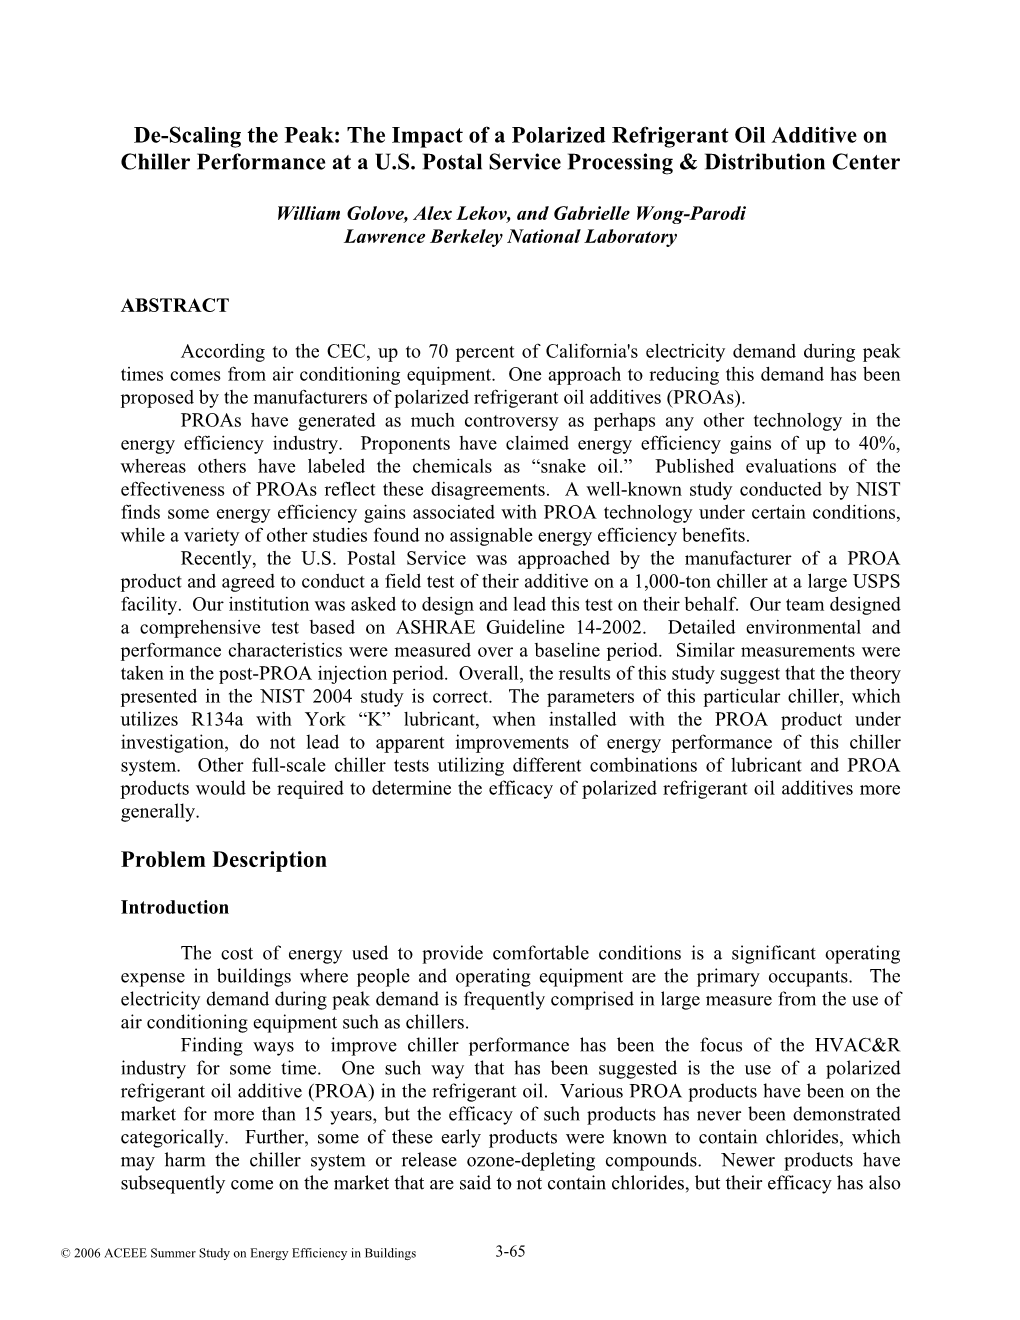 The Impact of a Polarized Refrigerant Oil Additive on Chiller Performance at a U.S